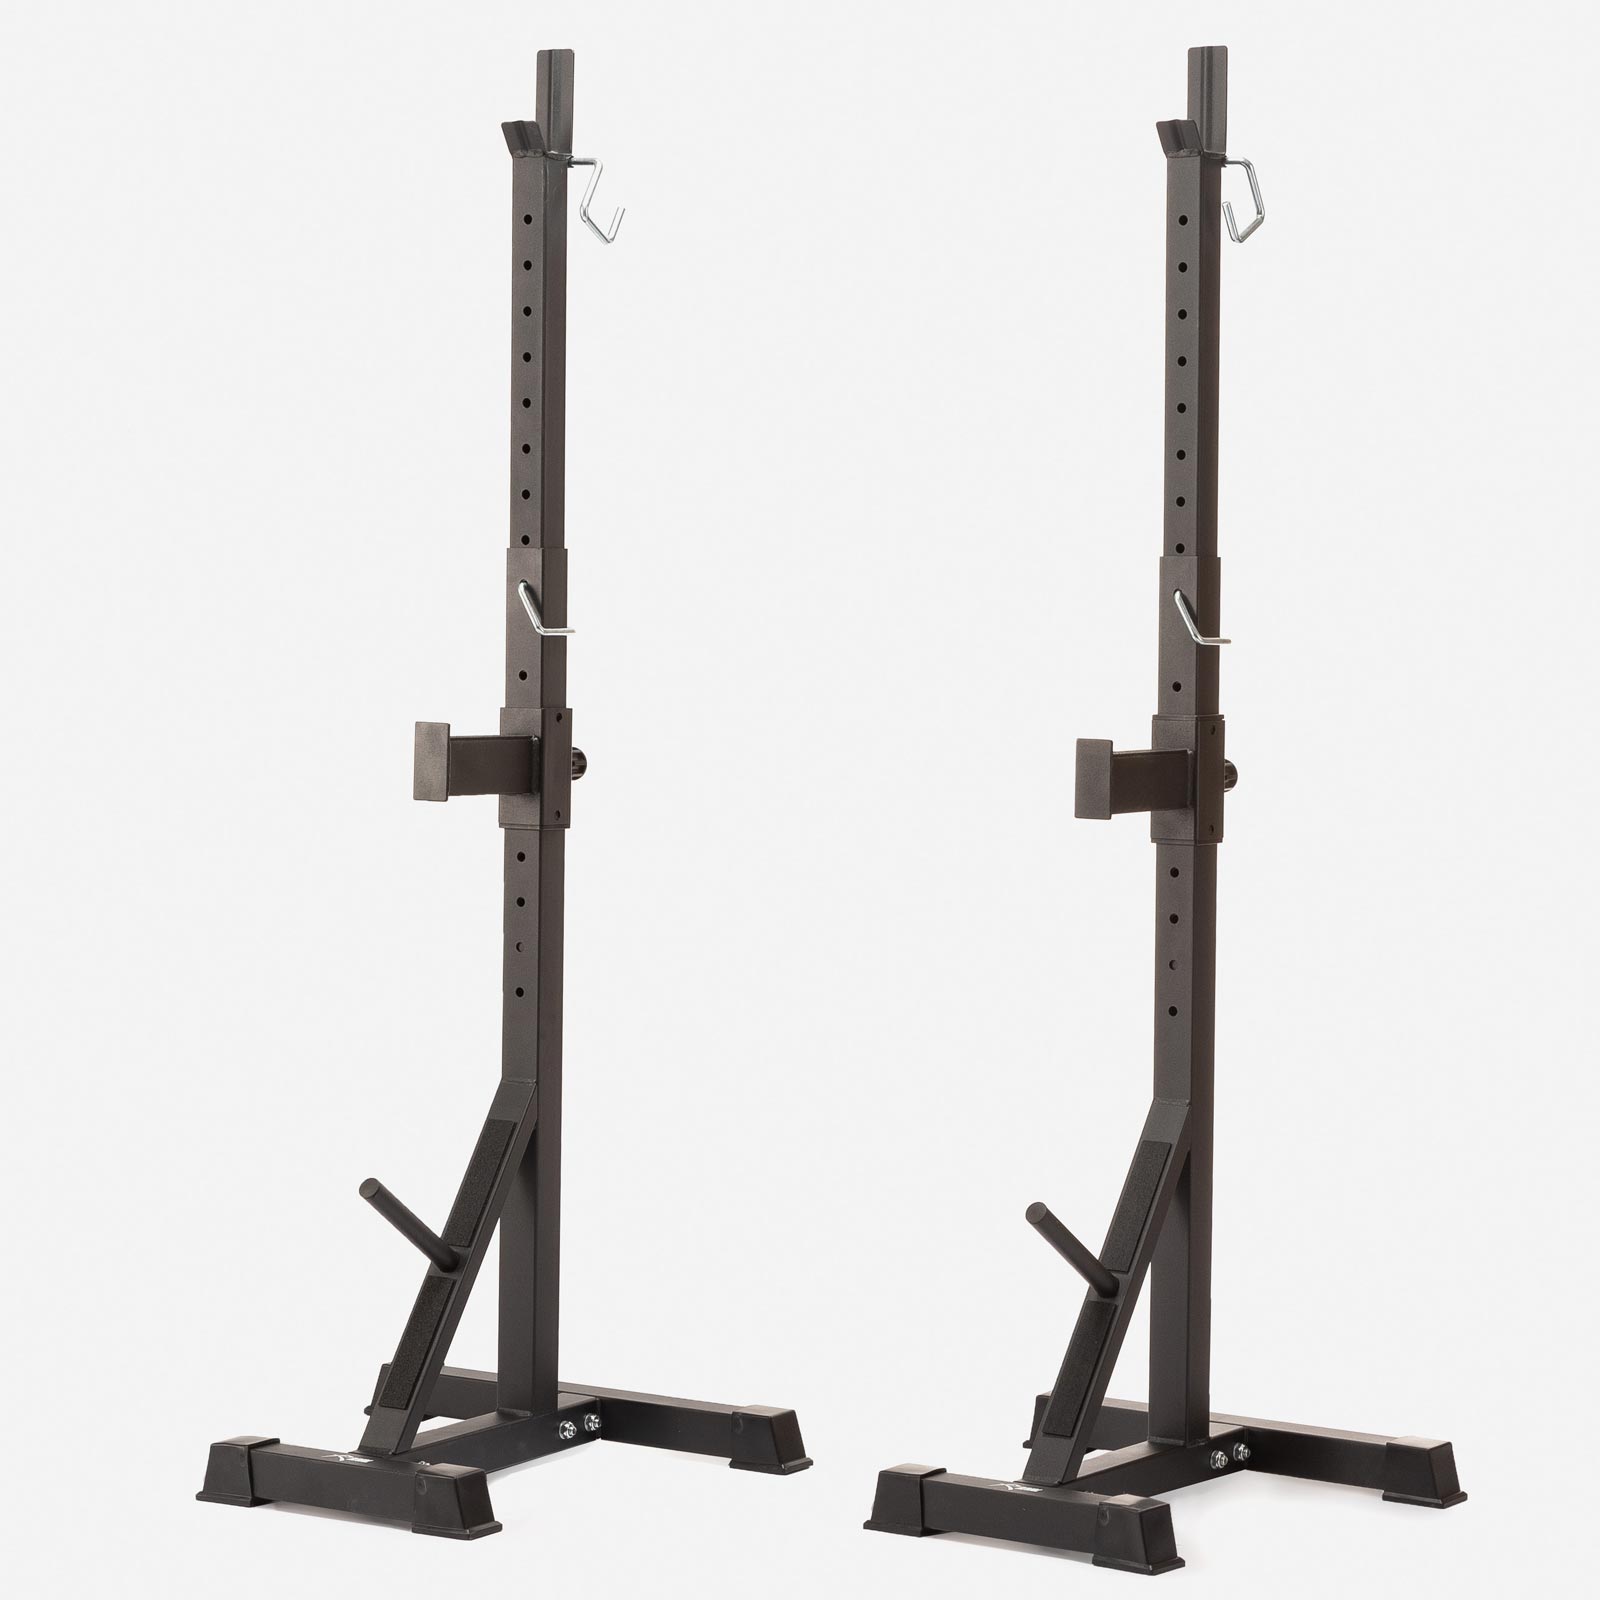 RIVAL SQUAT RACK STANDS